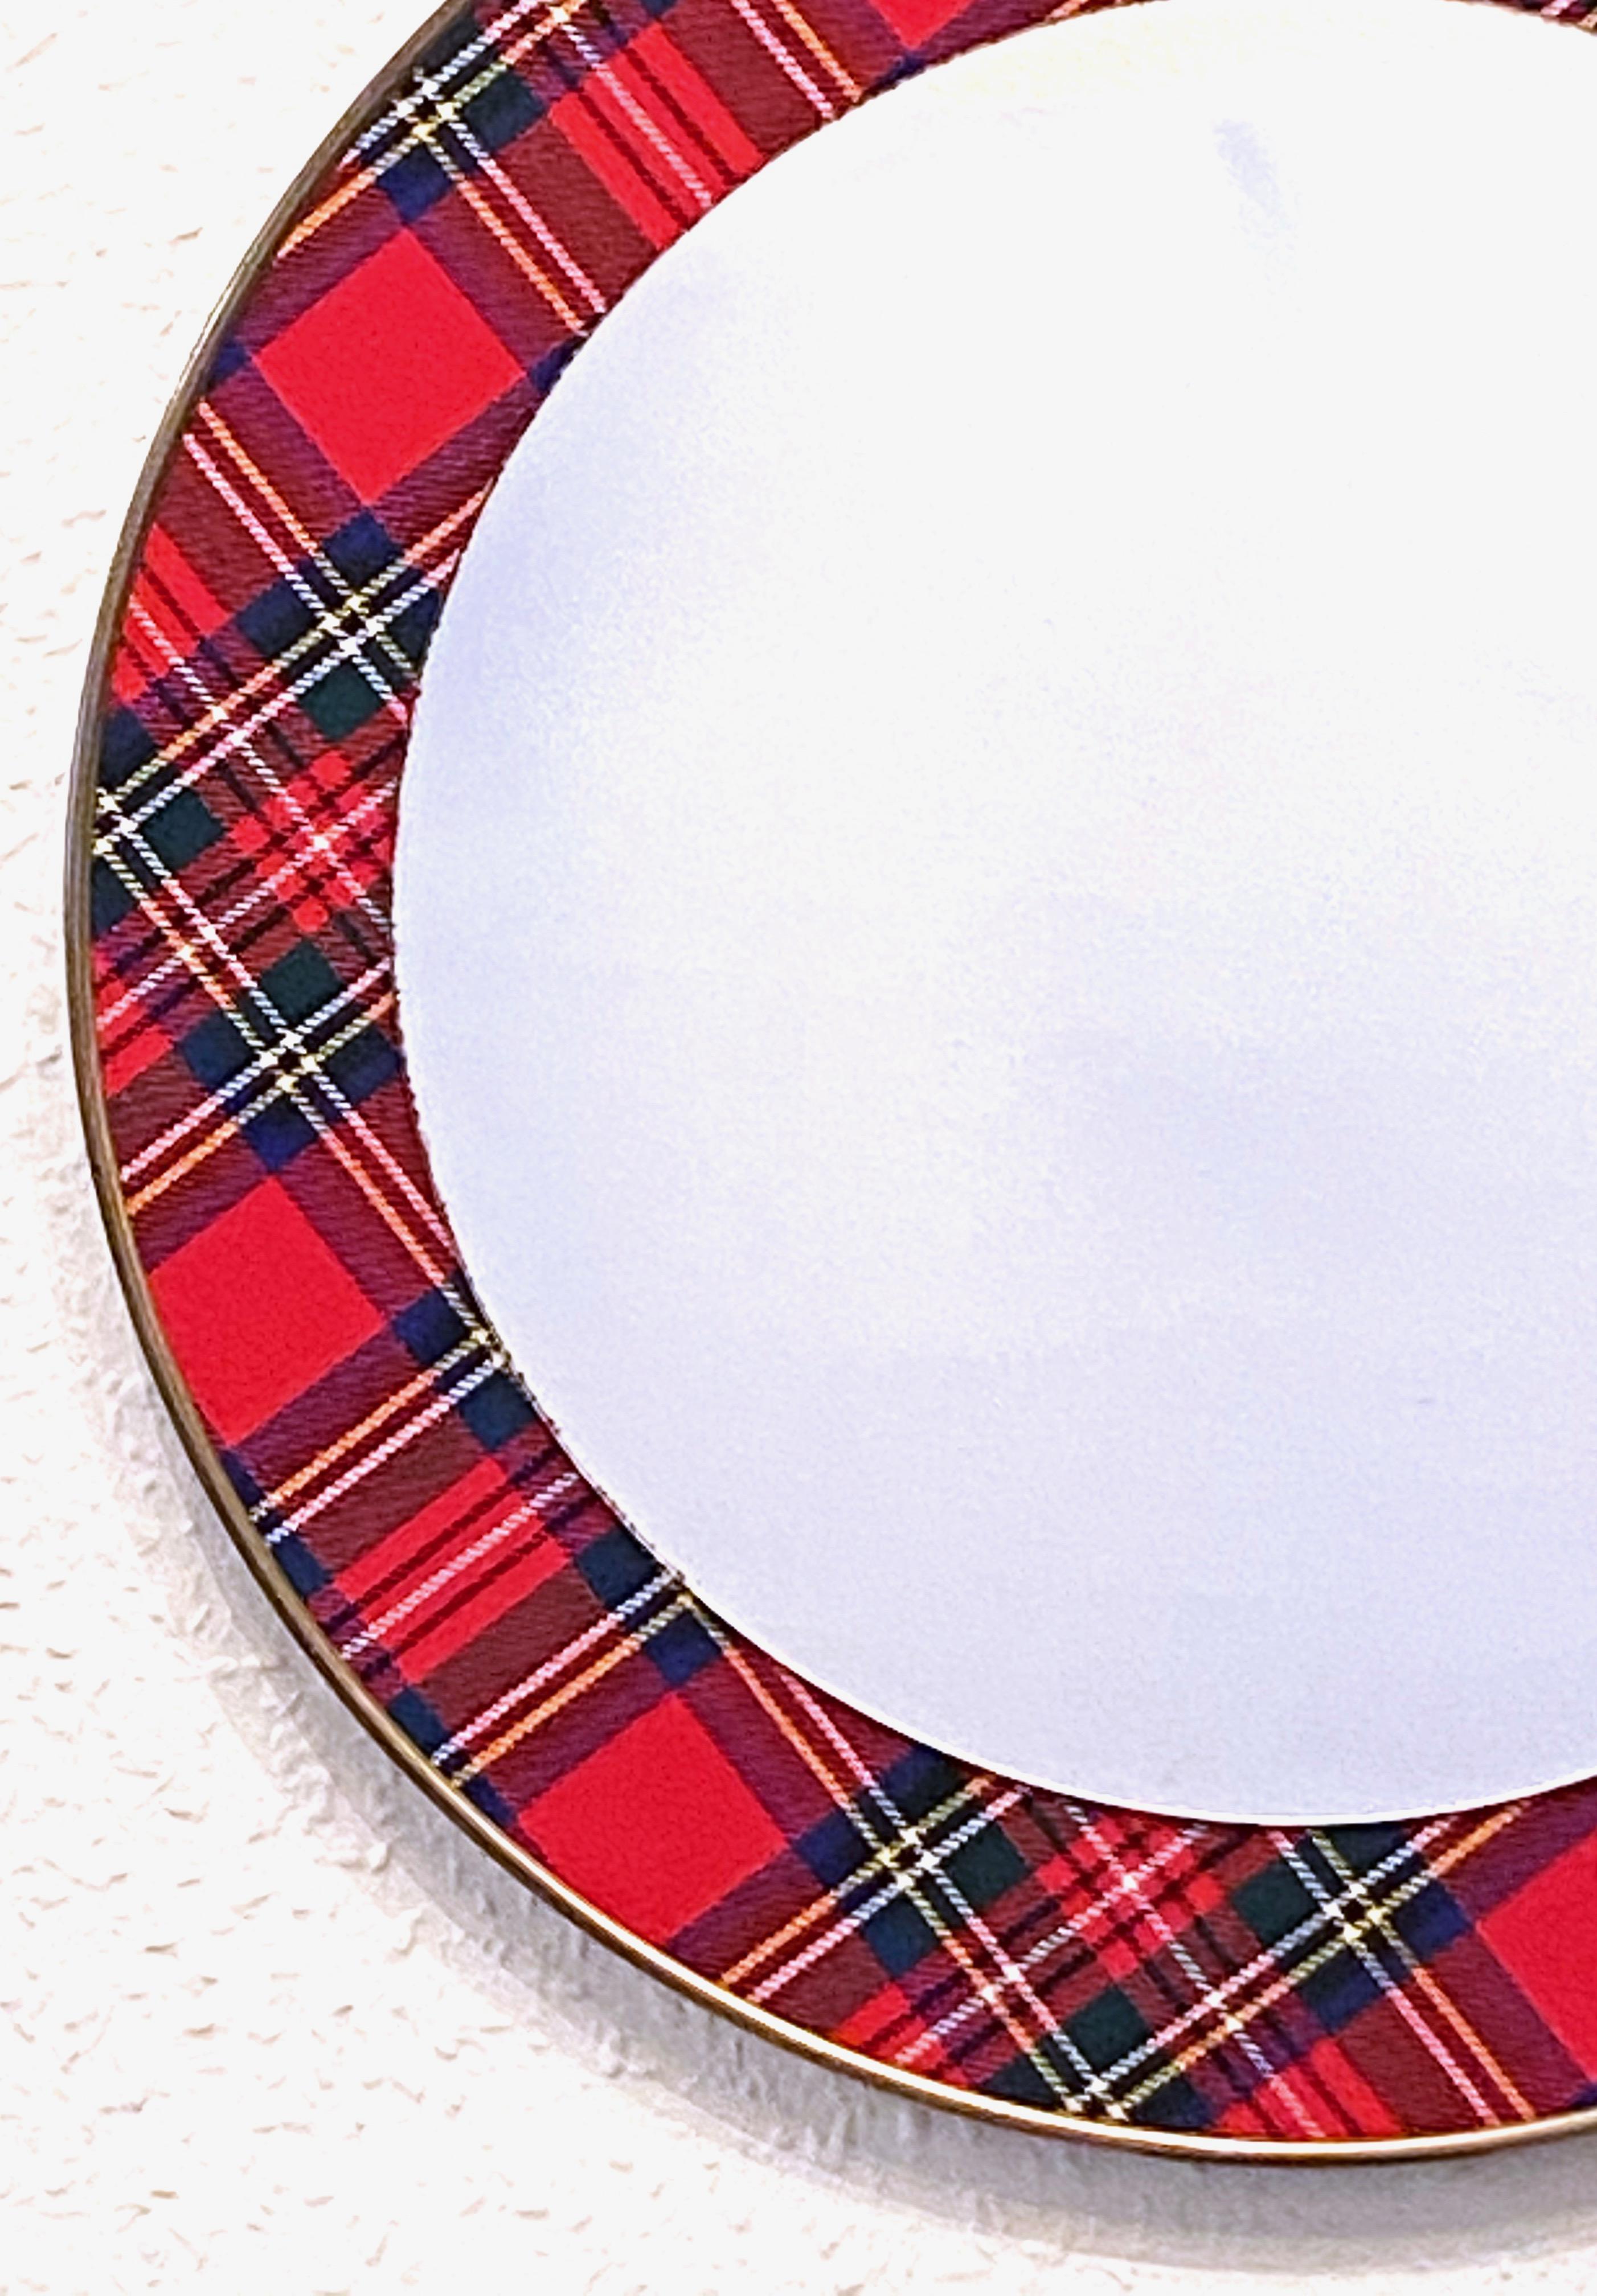 Stunning Mid-Century Modern wall mirror in Scottish clan tartan design. Show your family routs. The wall mirror has a beautiful design and gives a room an eclectic statement. Mirror itself is approx. 10 1/8